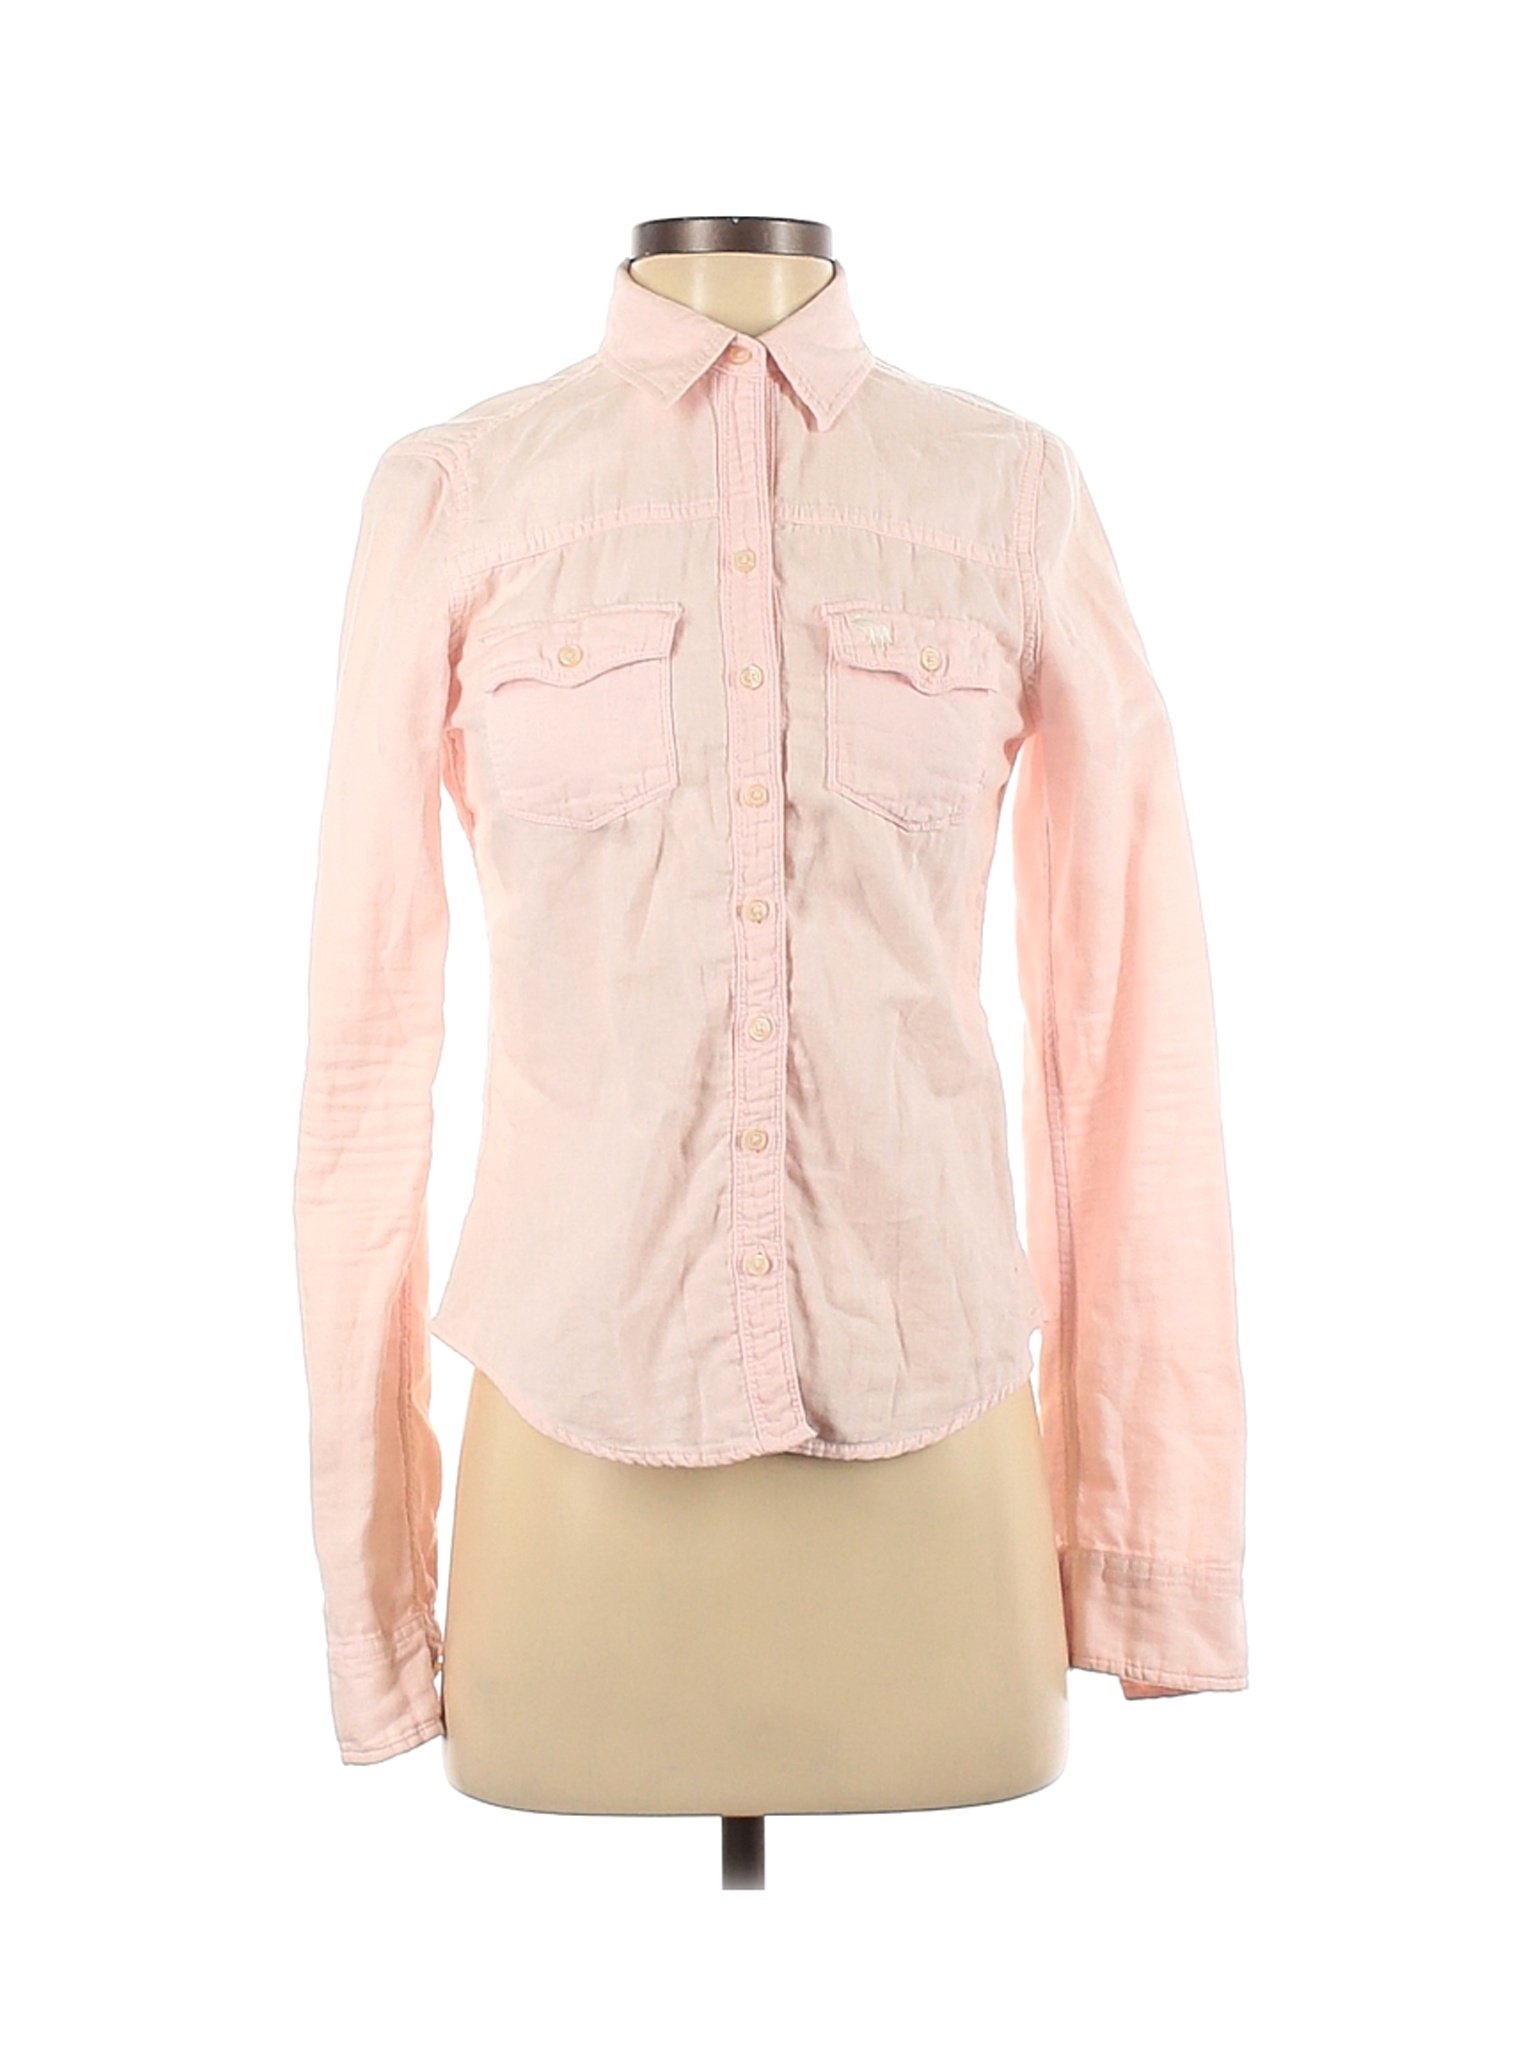 Abercrombie & Fitch Women Pink Long Sleeve Button-Down Shirt S | eBay